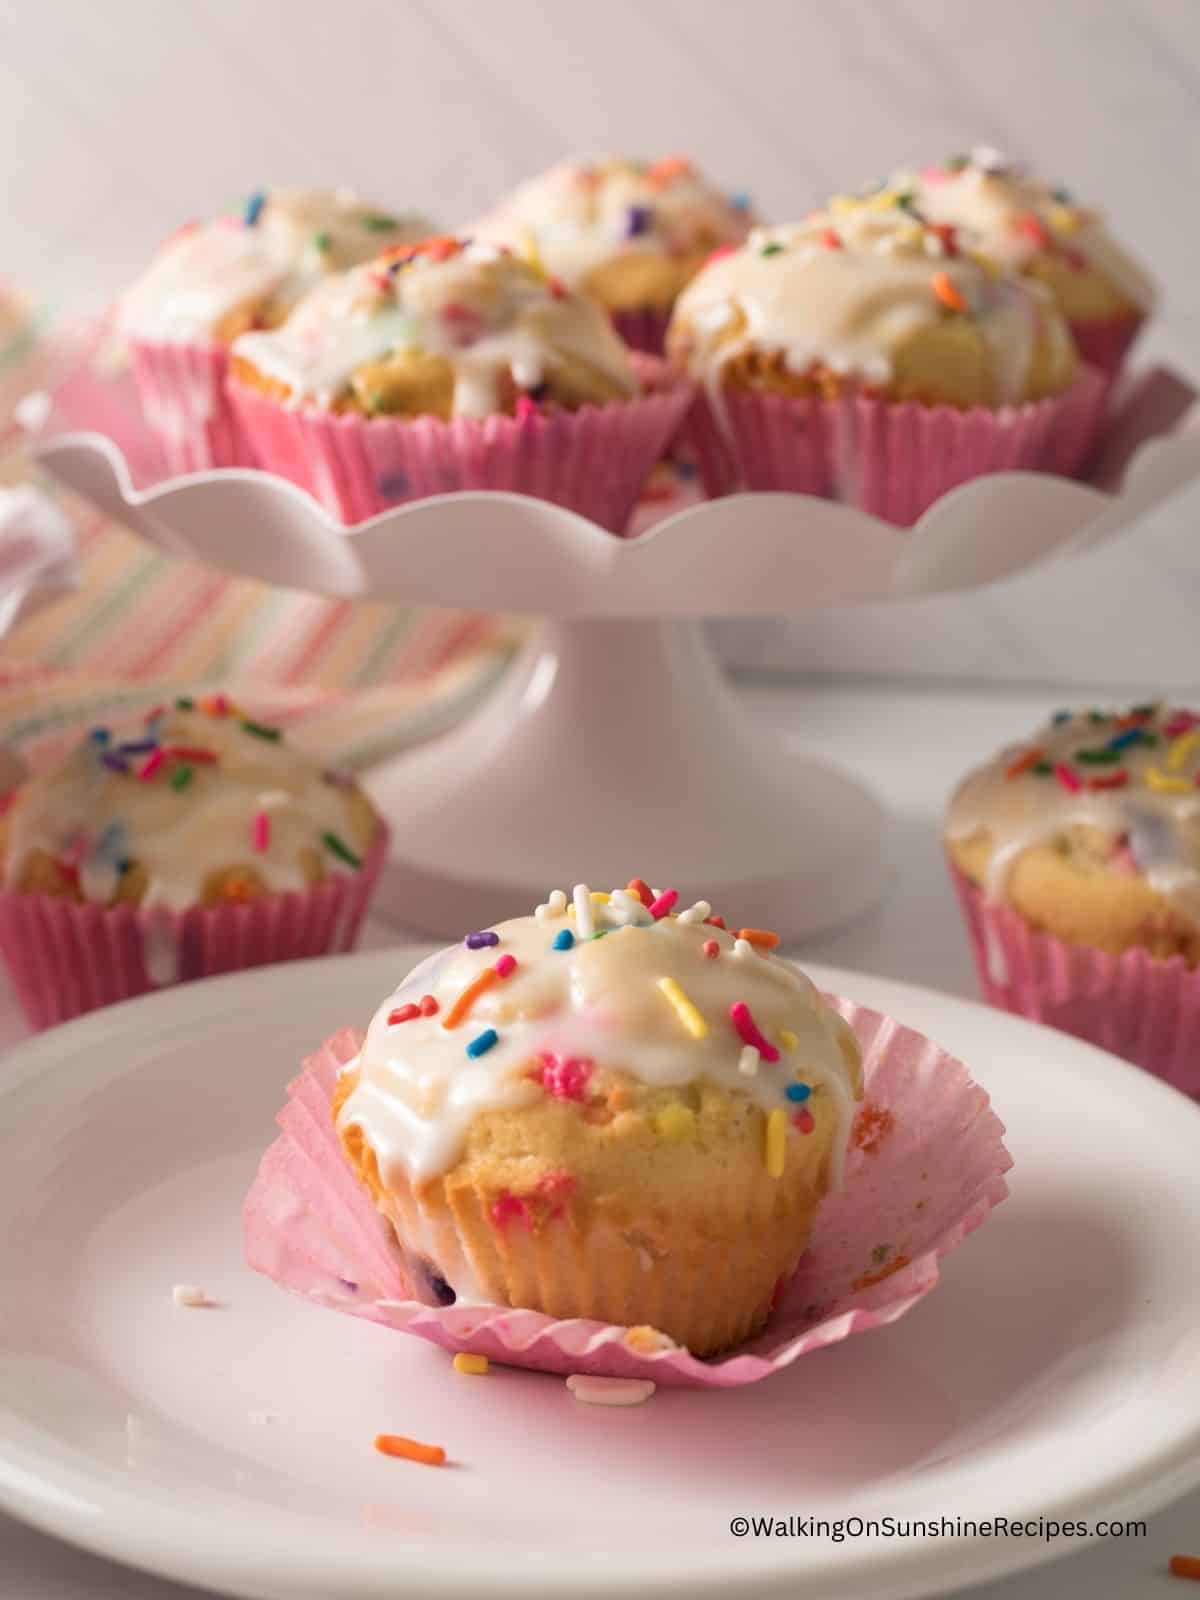 birthday muffins with sprinkles and powdered sugar glaze on plate and cake stand.